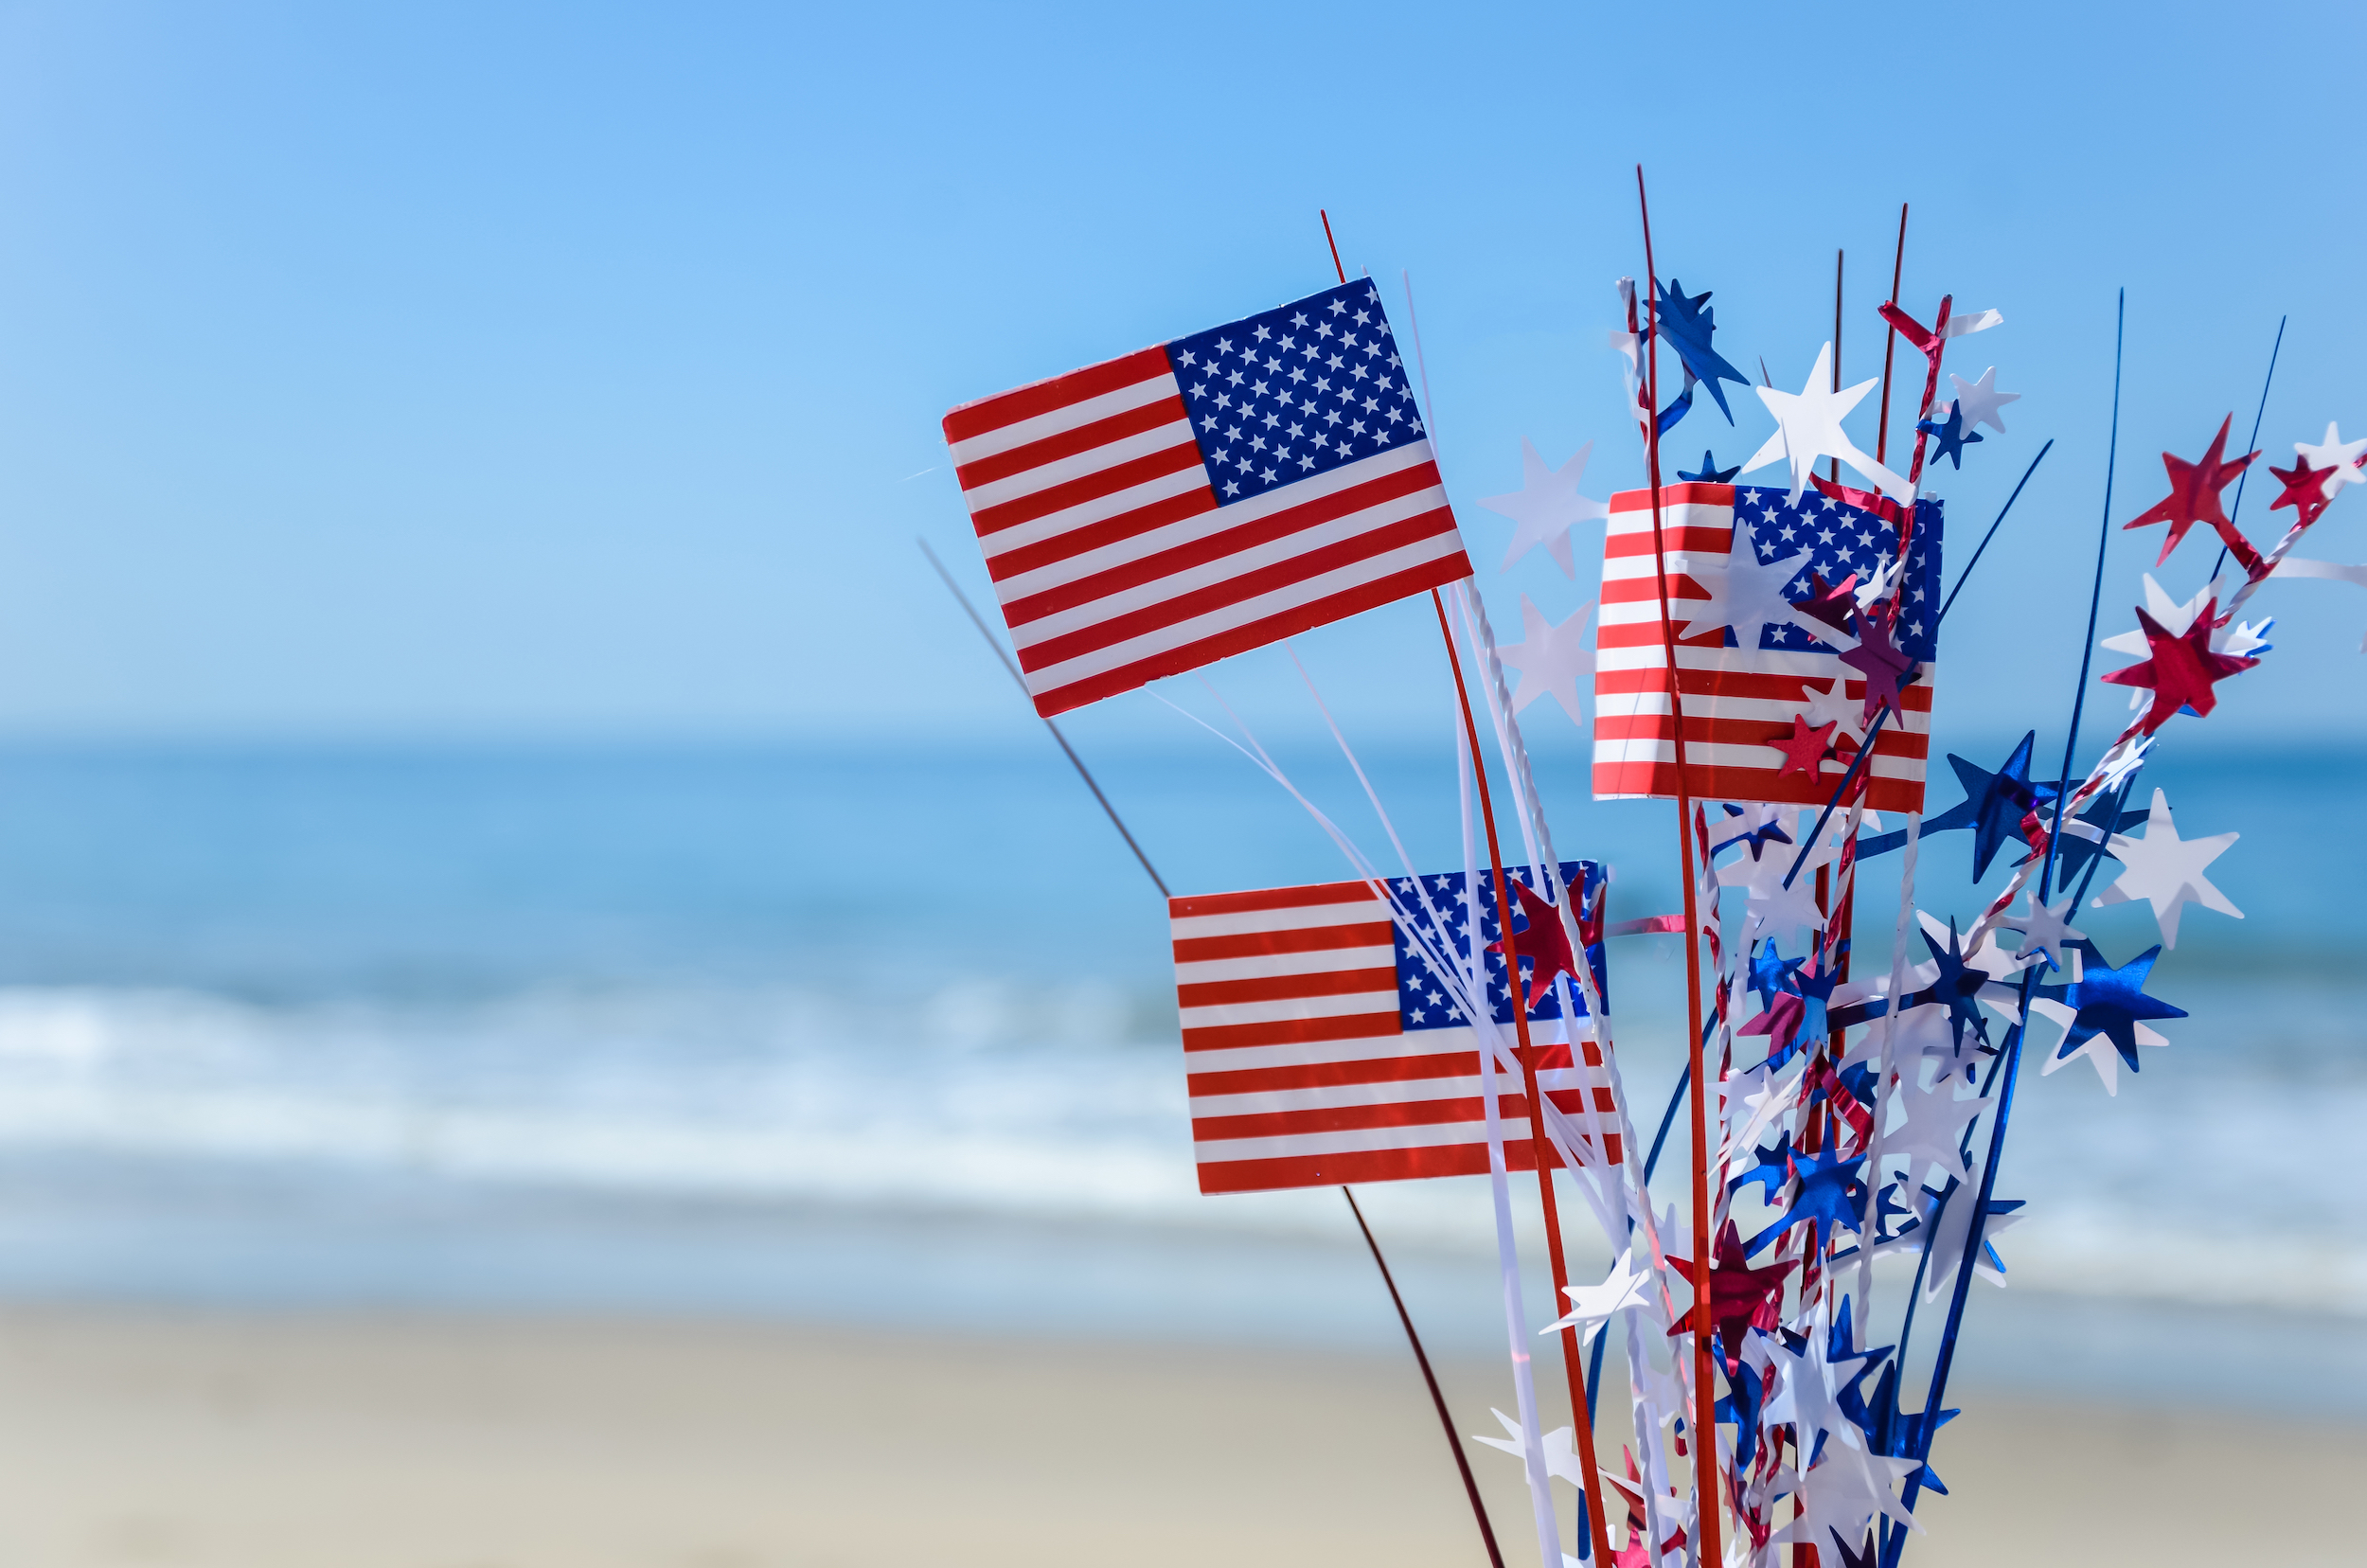 Patriotic,Usa,Background,With,Flags,And,Decorations,On,The,Sandy Best